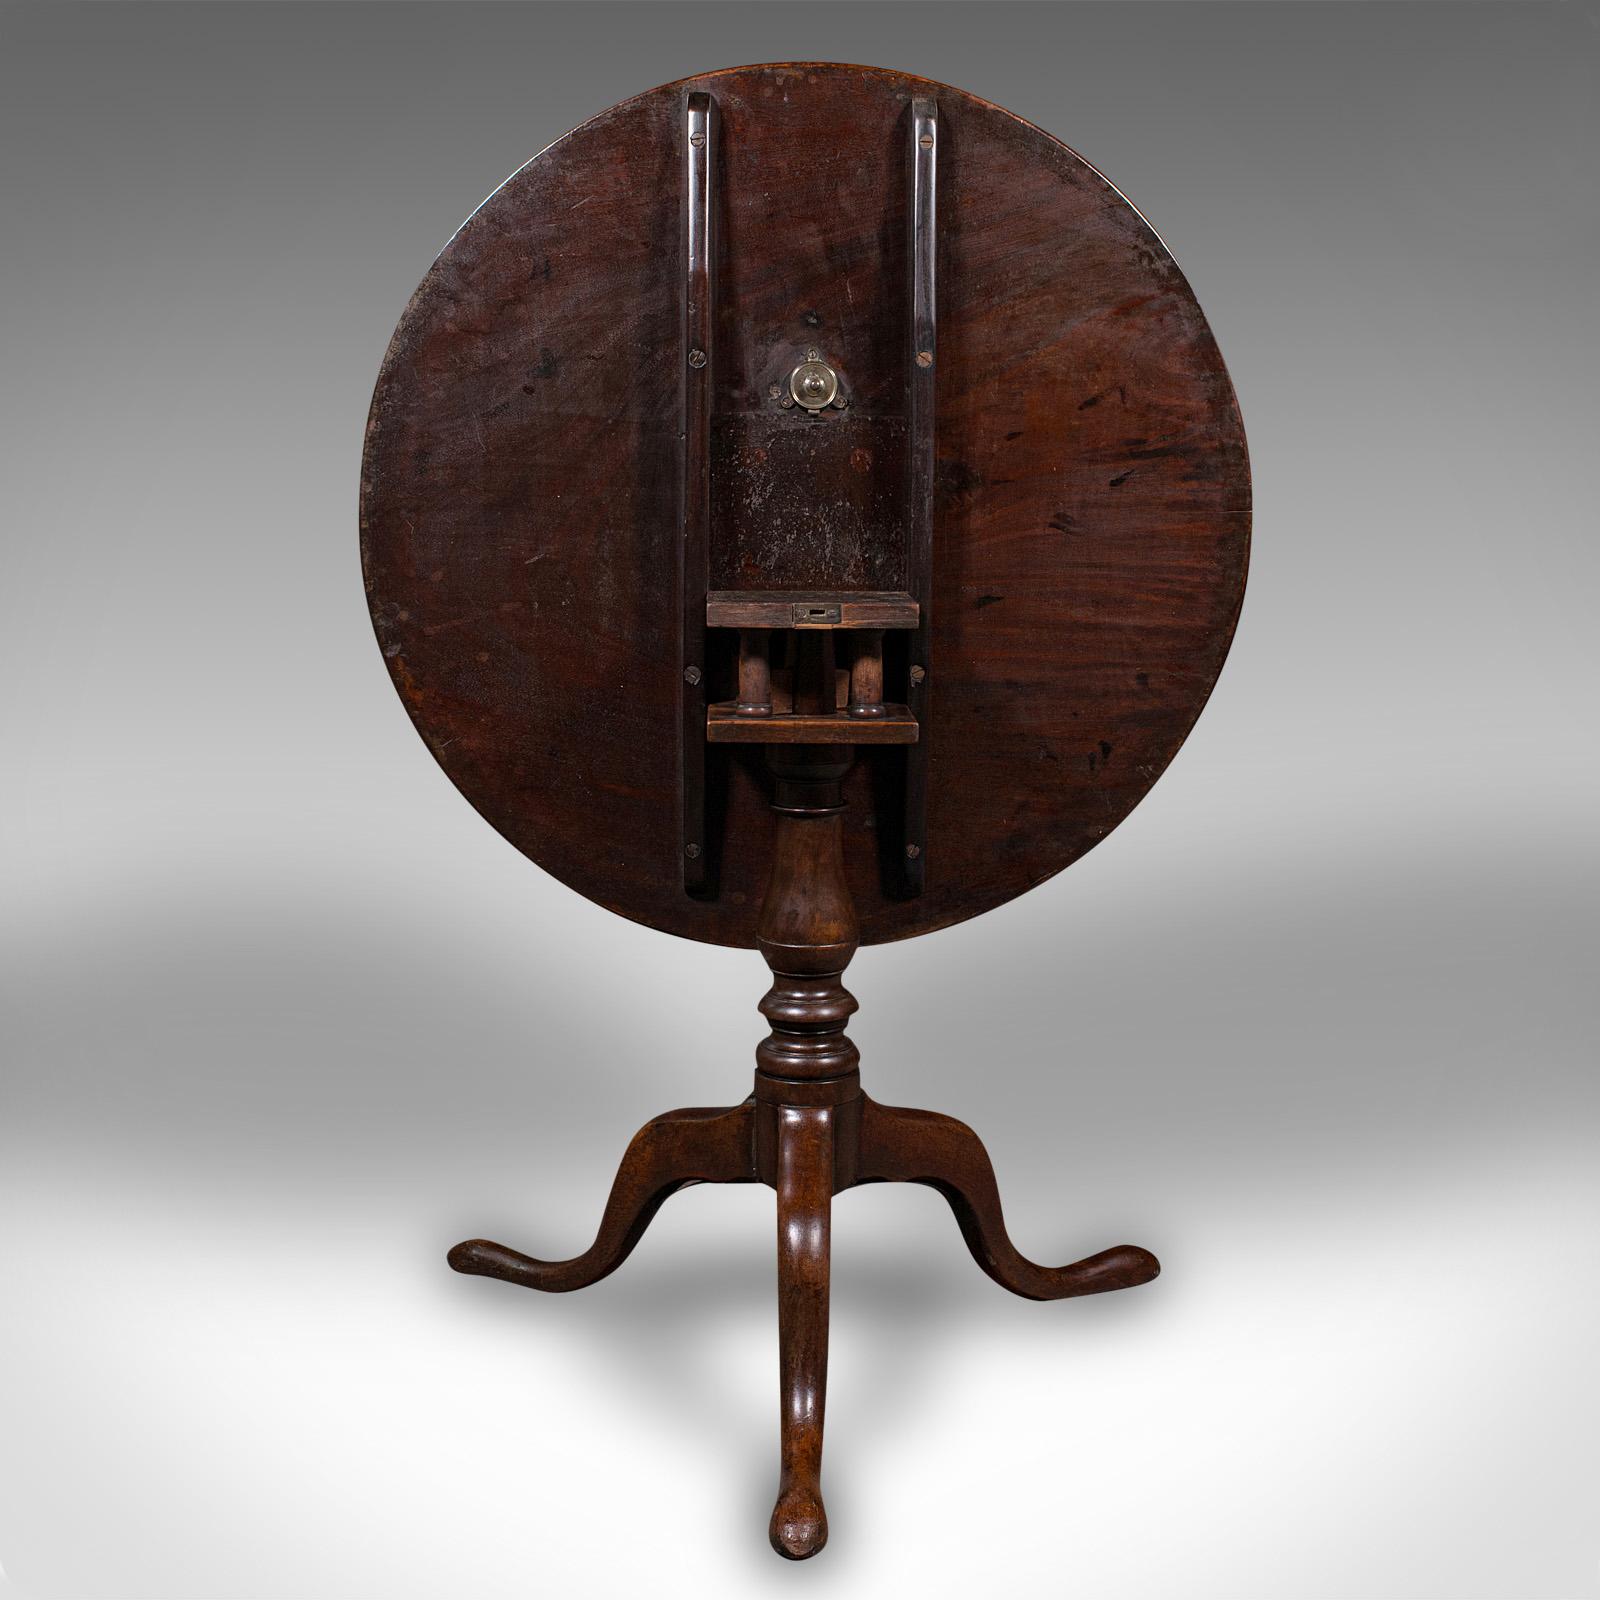 Antique Occasional Table, English, Tilt Top, Lamp, Afternoon Tea, Georgian, 1800 For Sale 4